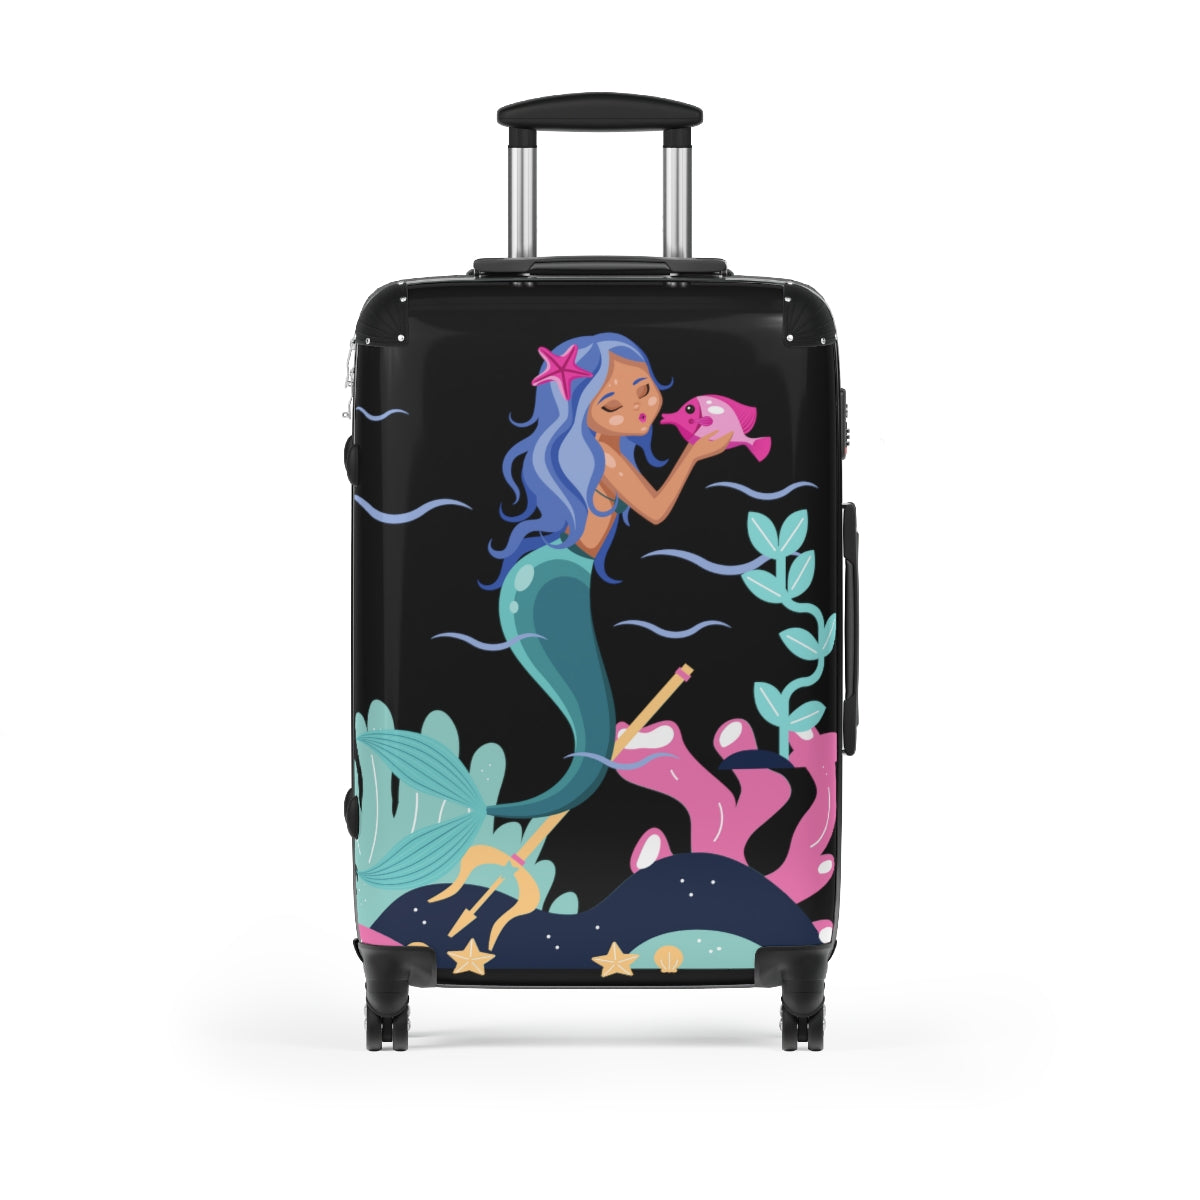 MERMAID SUITCASES LUGGAGE by Artzira, for Girls, All Sizes, Artistic Designs, Double Wheeled Spinner